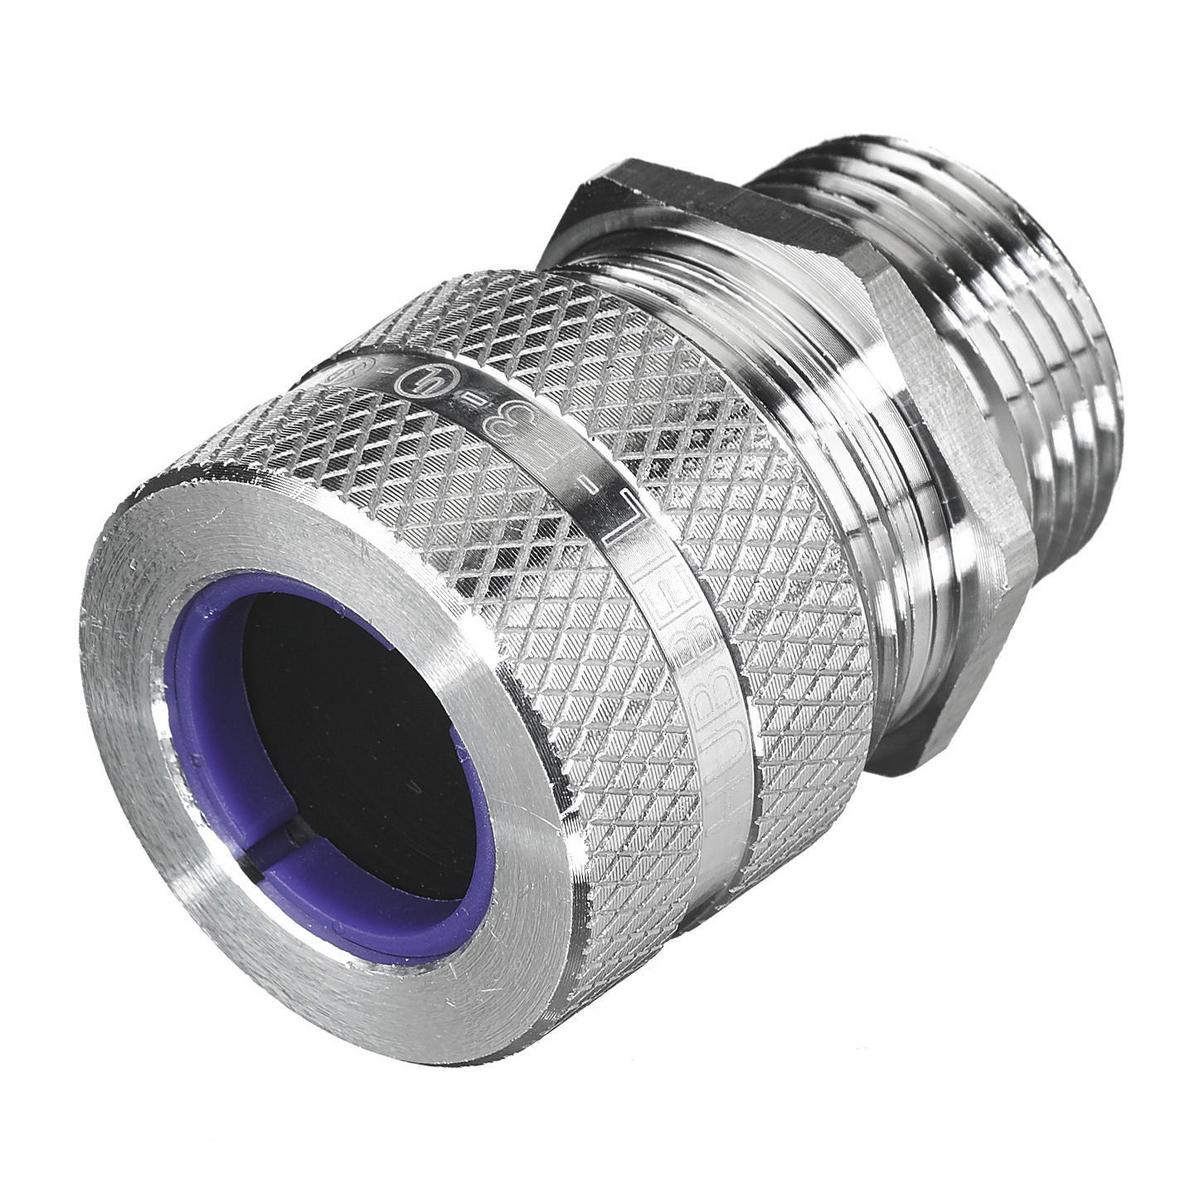 Hubbell SHC1038 Kellems Wire Management, Cord Connectors, Straight Male, .75-.88", 3/4", Aluminum  ; Aluminum cord connector provides durable performance ; Standard Product